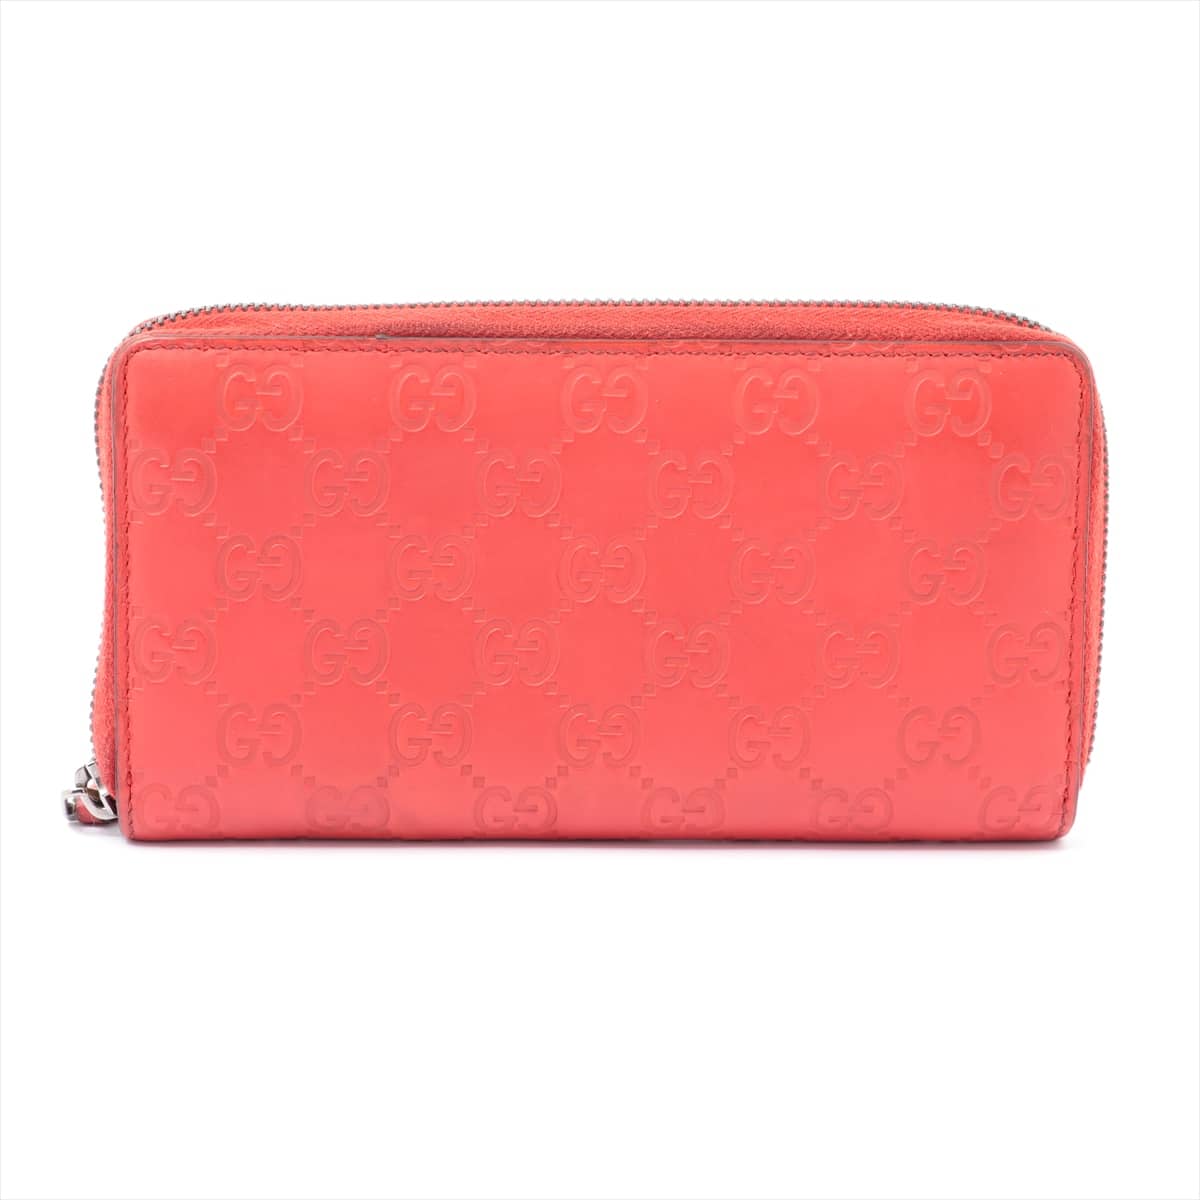 Gucci Guccissima 307987 Leather Wallet Red